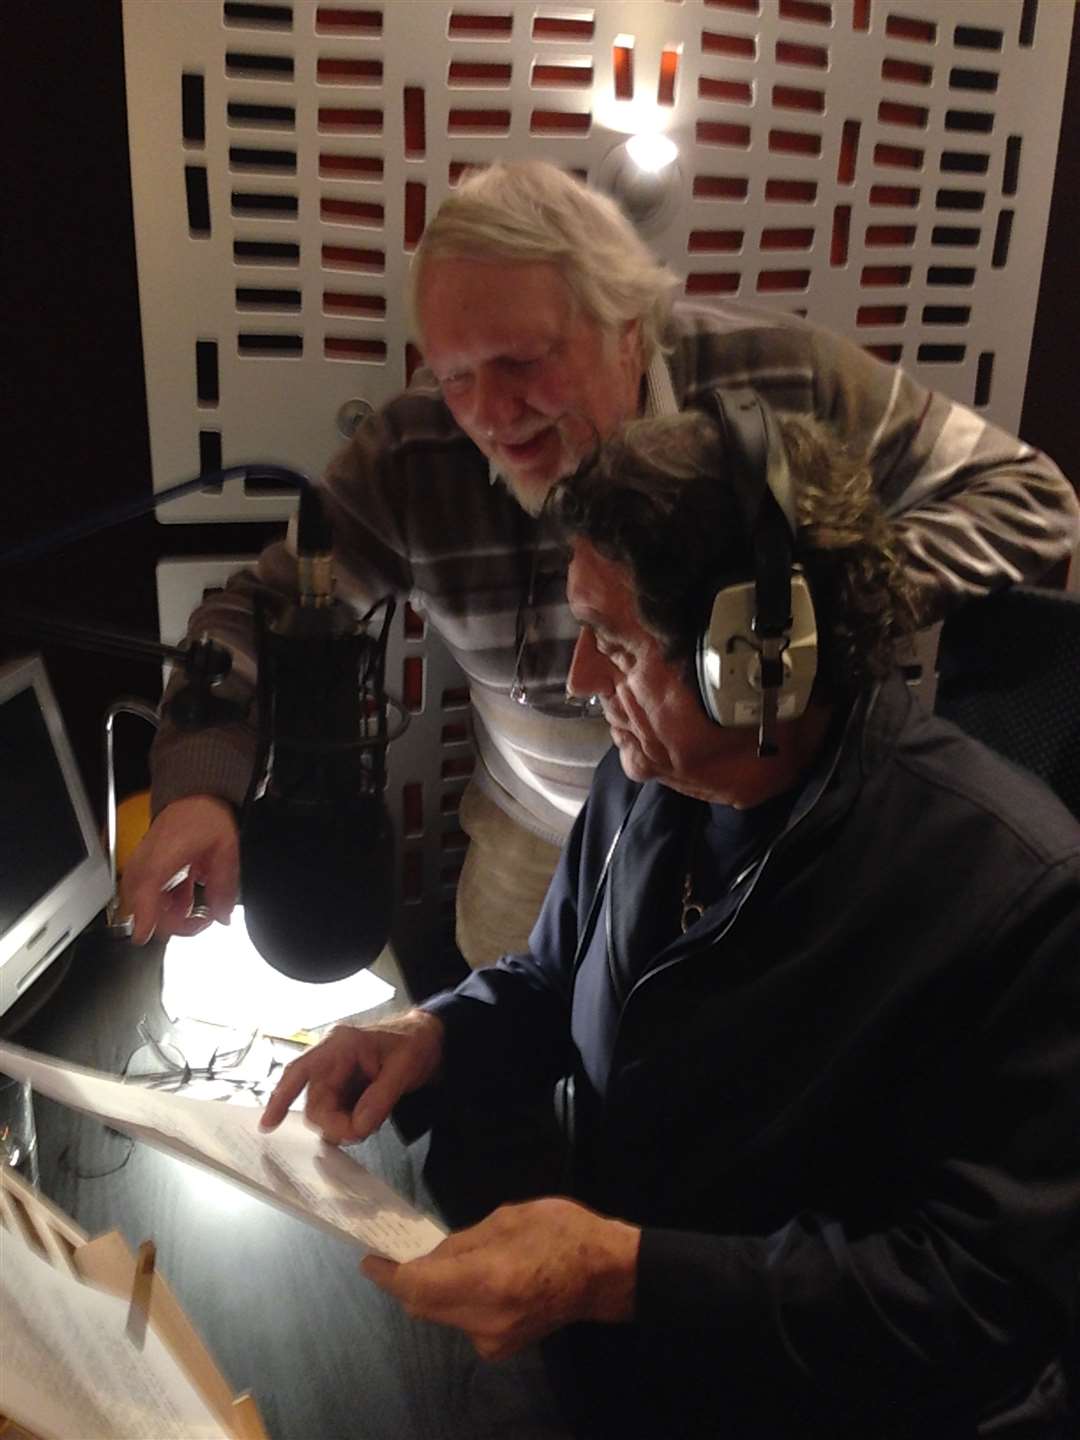 Ken Rowles and Ian McShane recording the voiceover for A Disaster Waiting To Happen